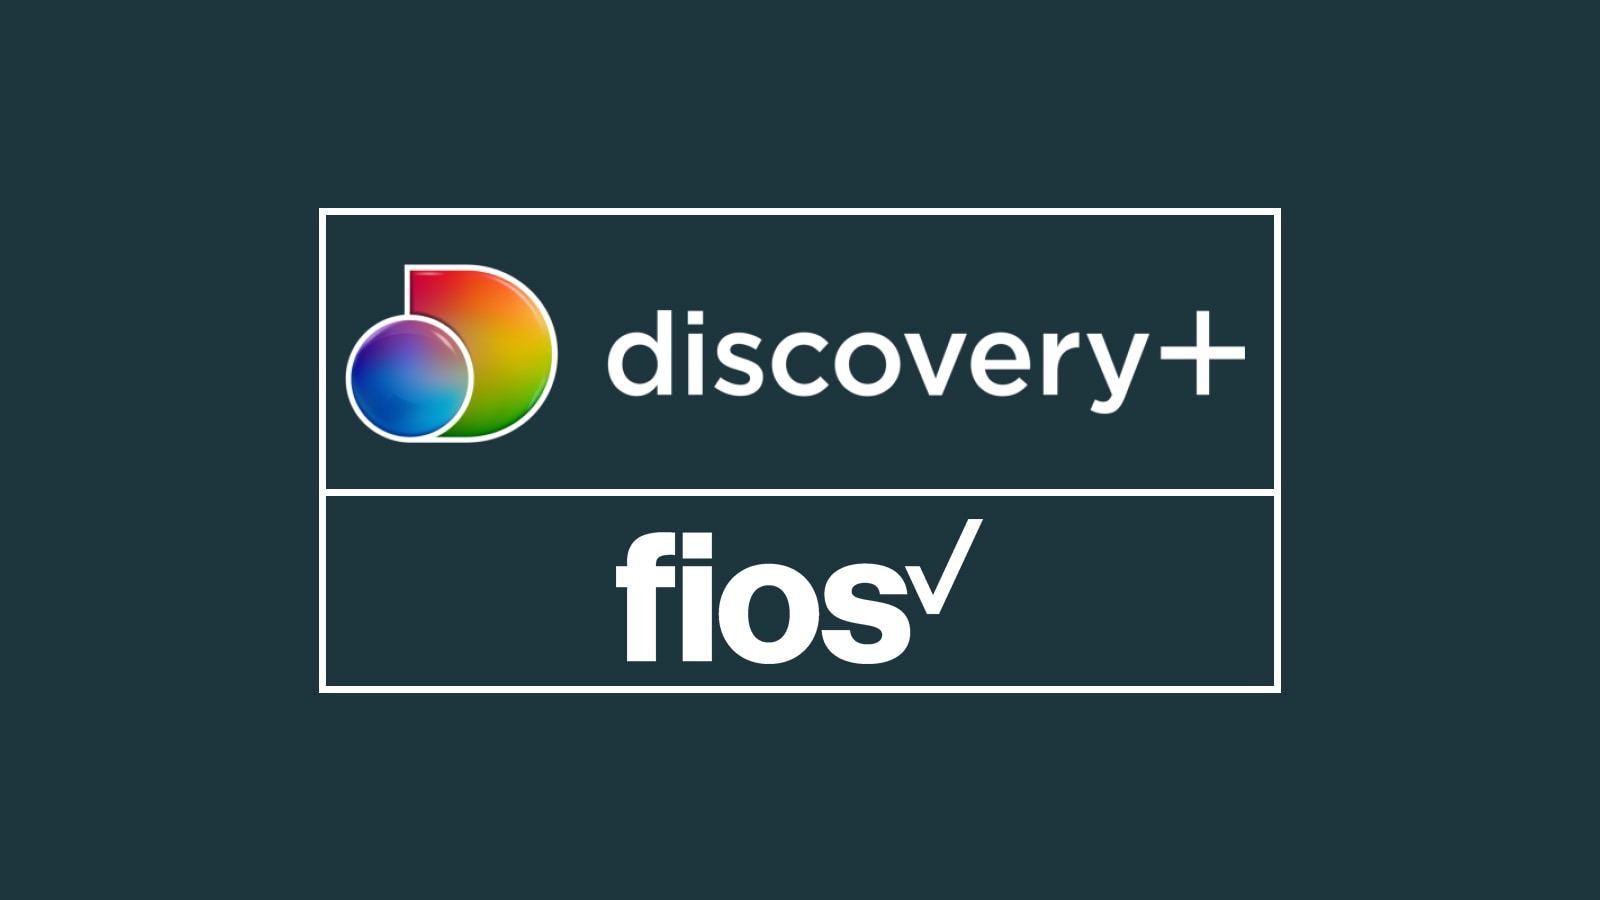 How to Get Discovery Plus on Fios (For Free!) - TechNadu